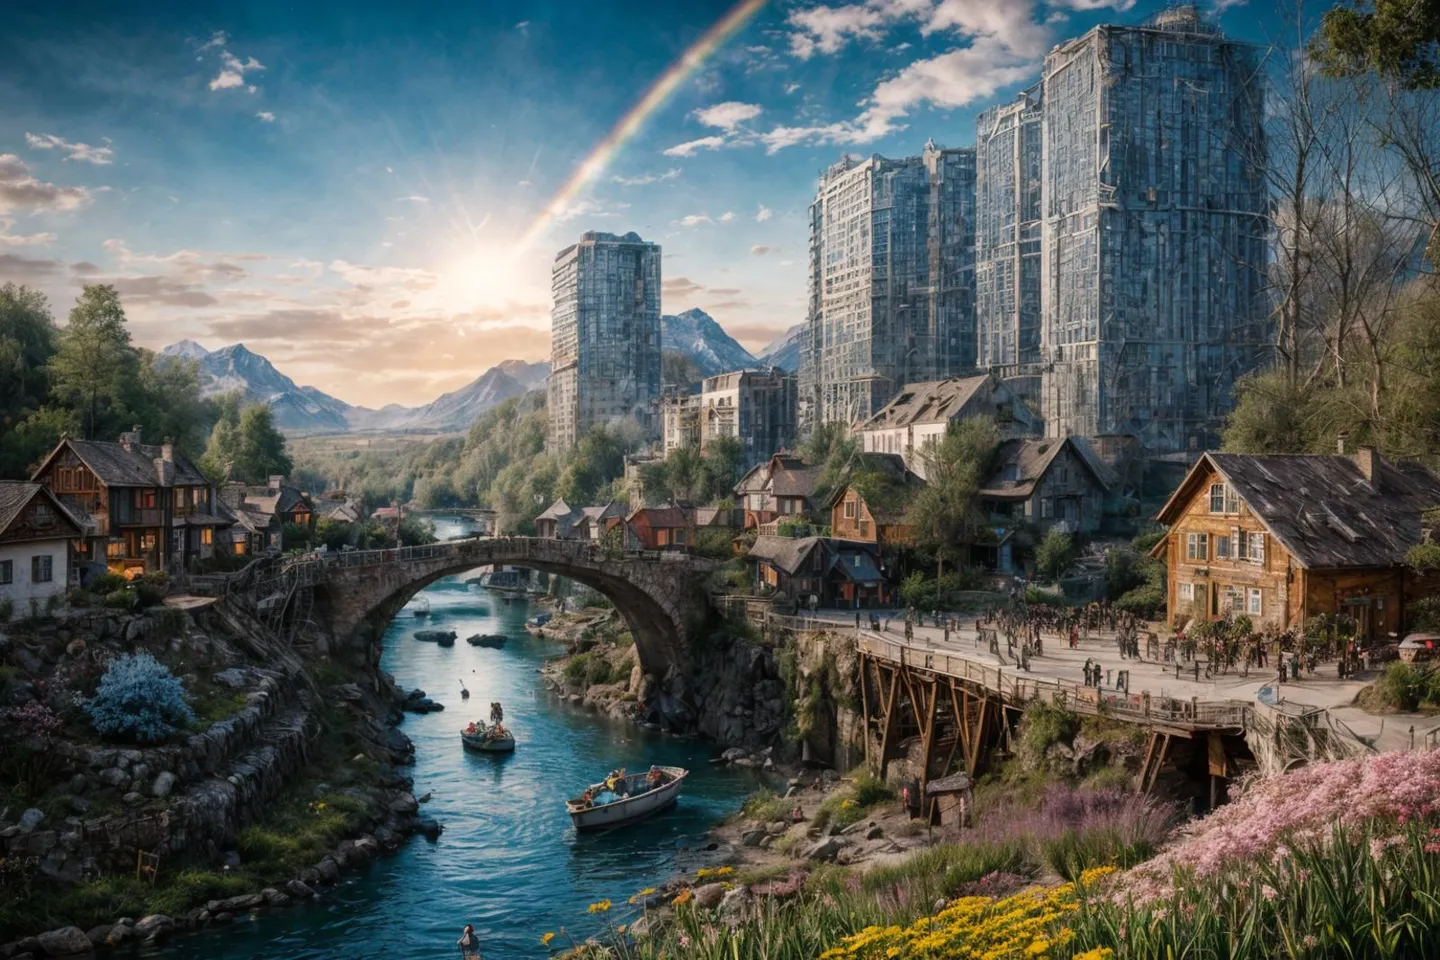 A beautifully crafted AI-generated image using Stable Diffusion, depicting a serene utopian village alongside a clear river. Characterized by a mix of quaint cottages and towering futuristic buildings under a vibrant sky with a rainbow and distant mountains.